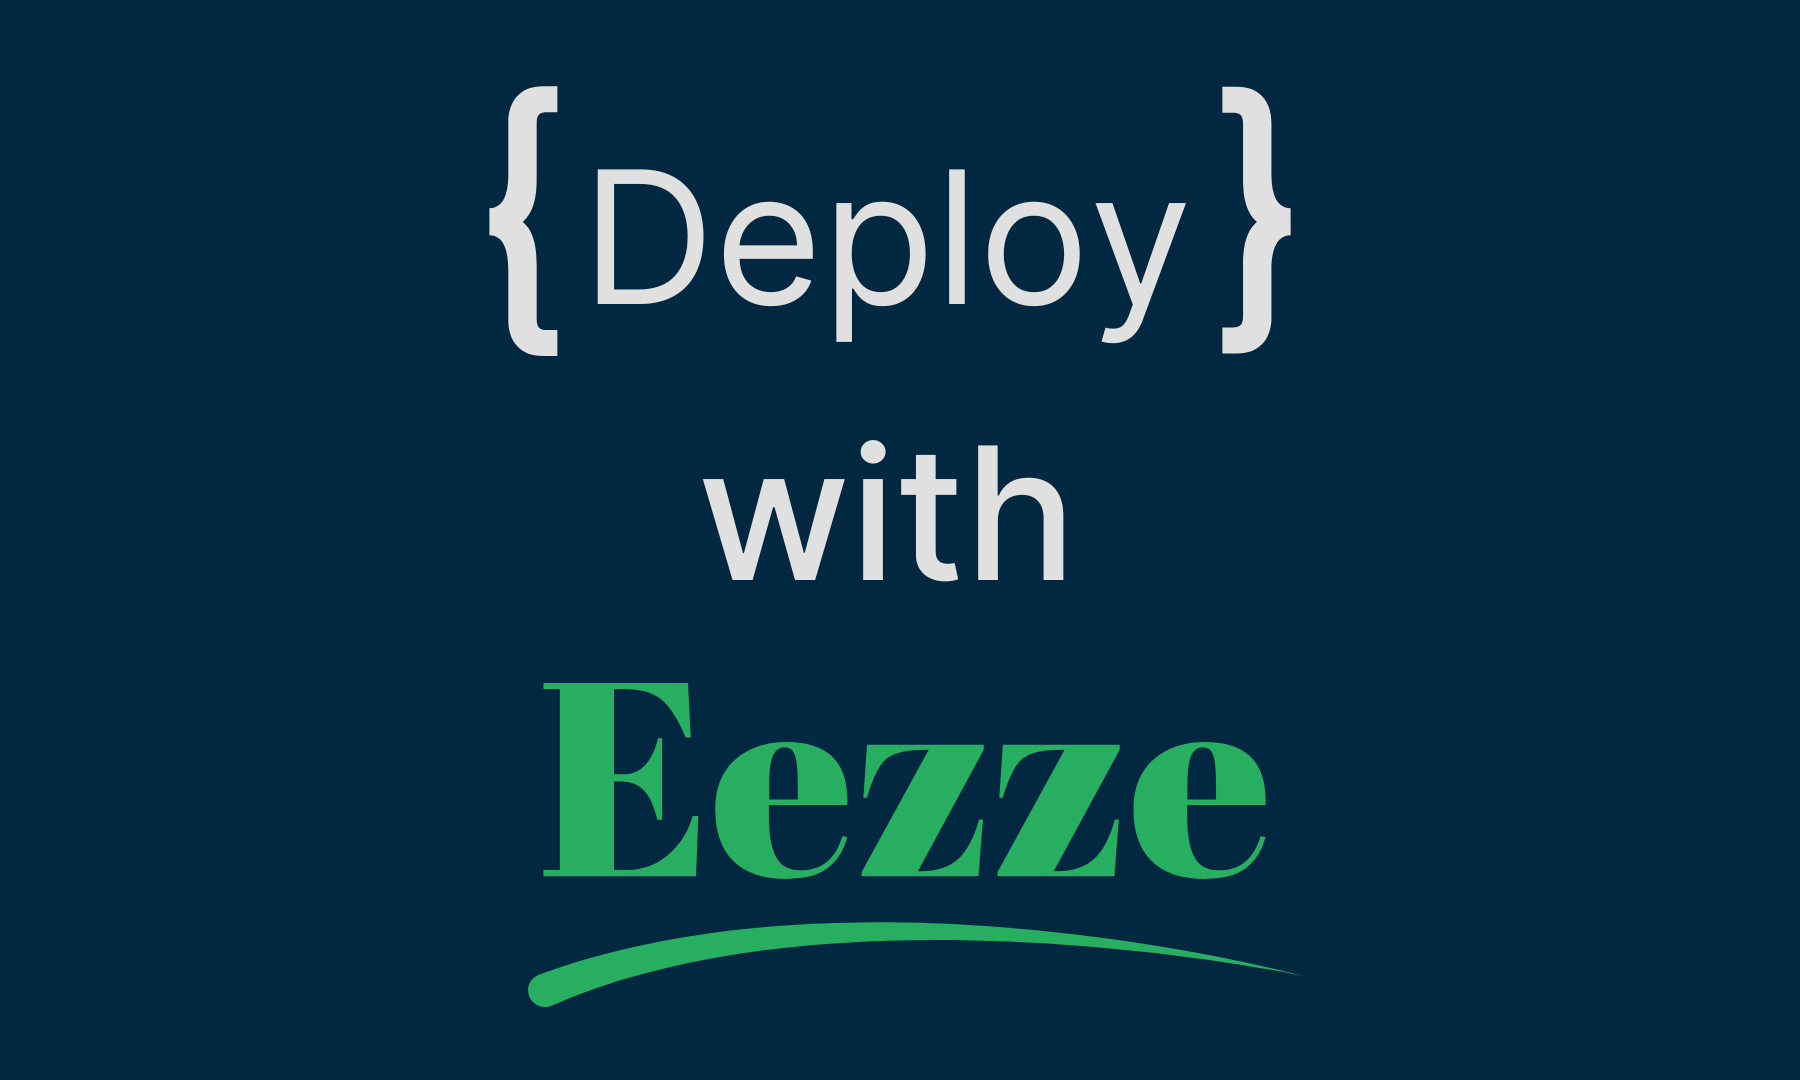 Eezze streamlines our internal backend deployment workflow through automation. Leveraging industry-standard tools for efficient server setup, dependency management, and scripting. Customers benefit from this optimized process for faster deployments.